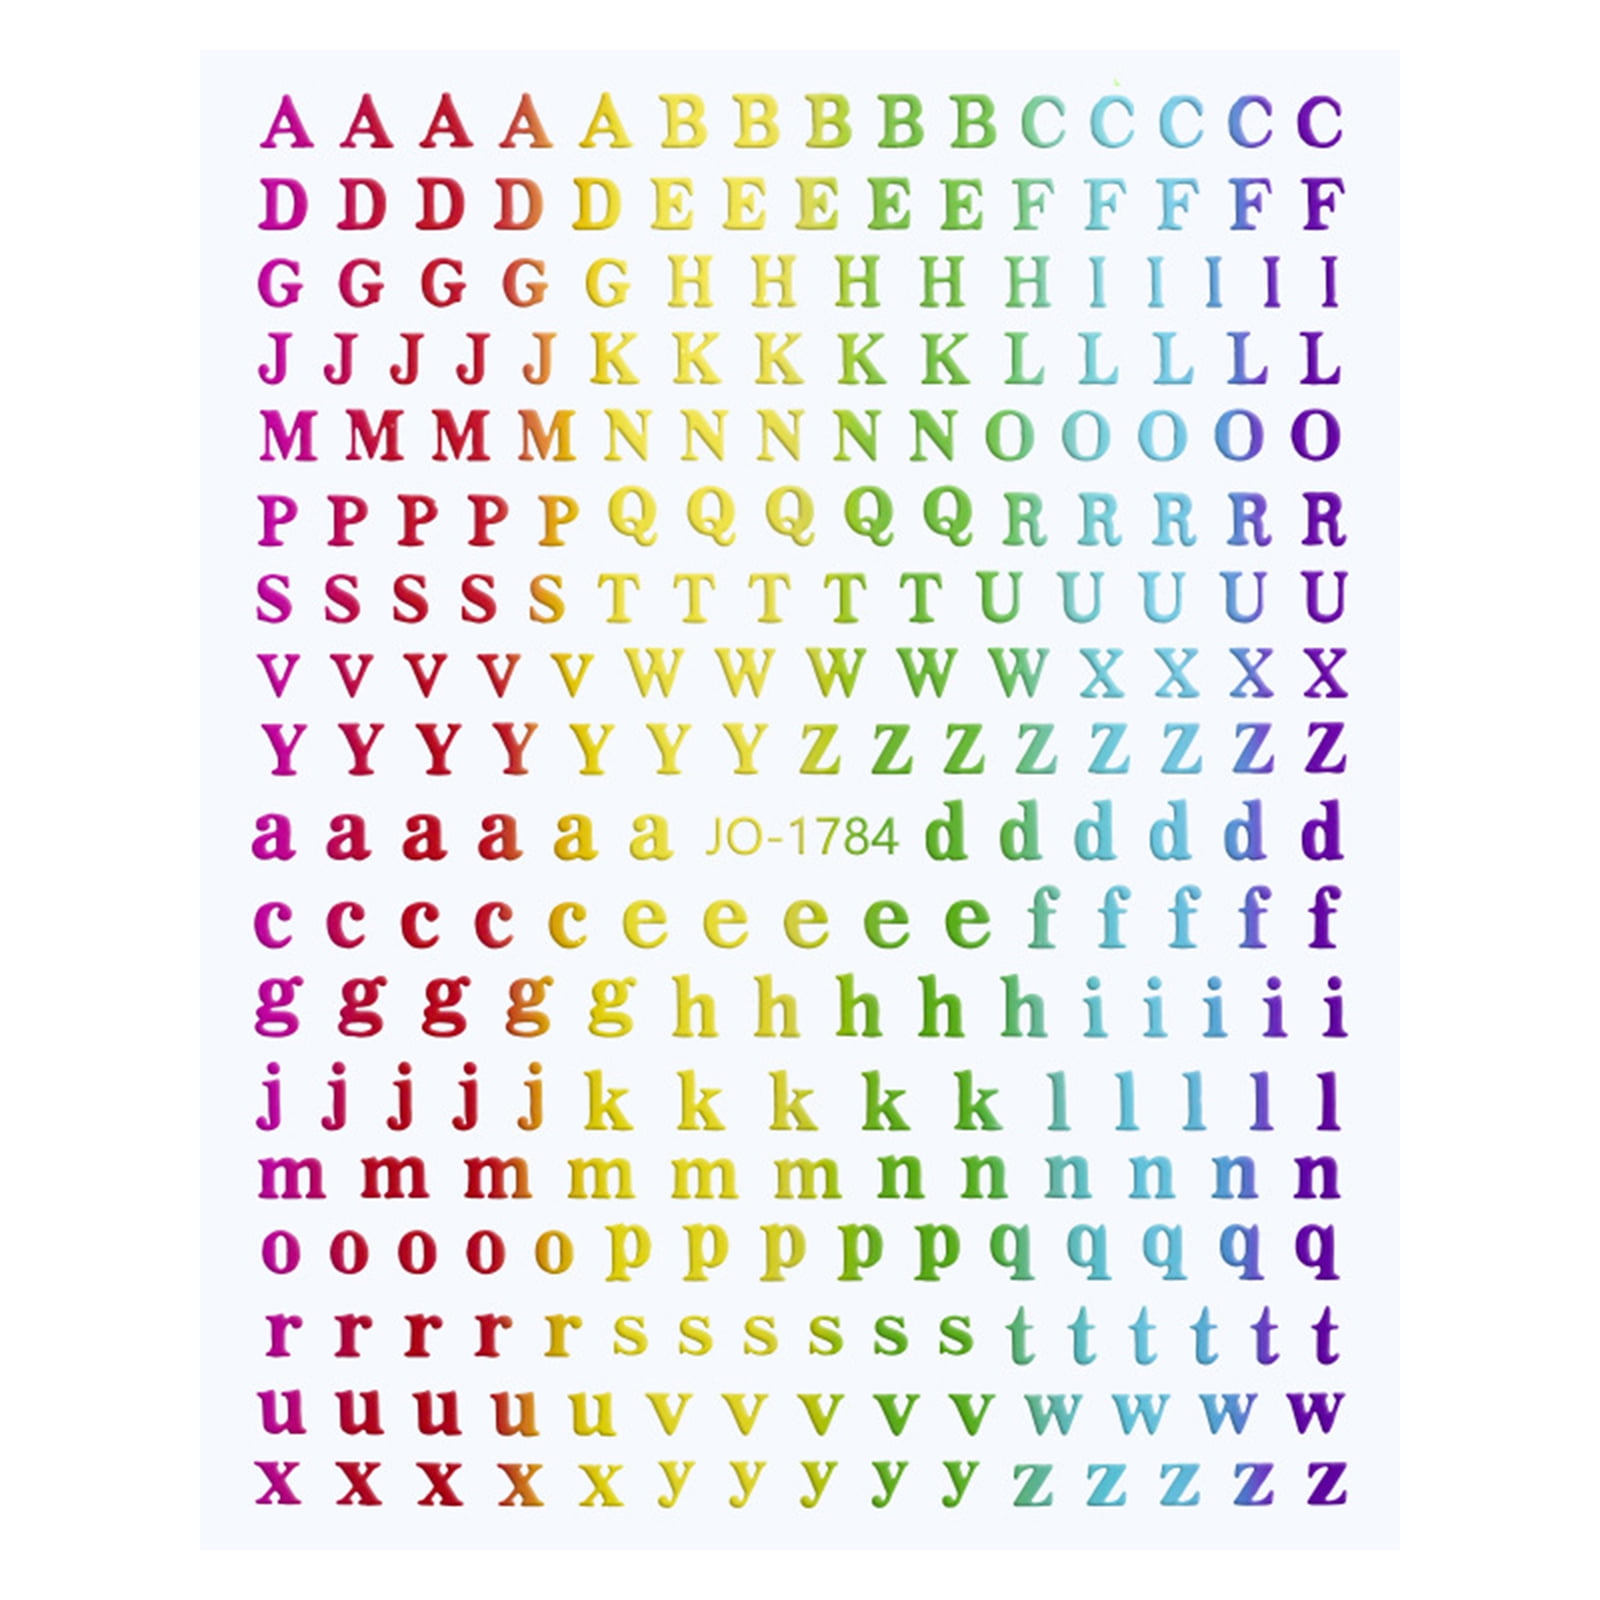 MAGICLULU 8 Sheets Alphabet Sticker Tags Removable Labels Waterproof  Stickers Number Decals Letter Stickers Large Small Letter Stickers Alphabet